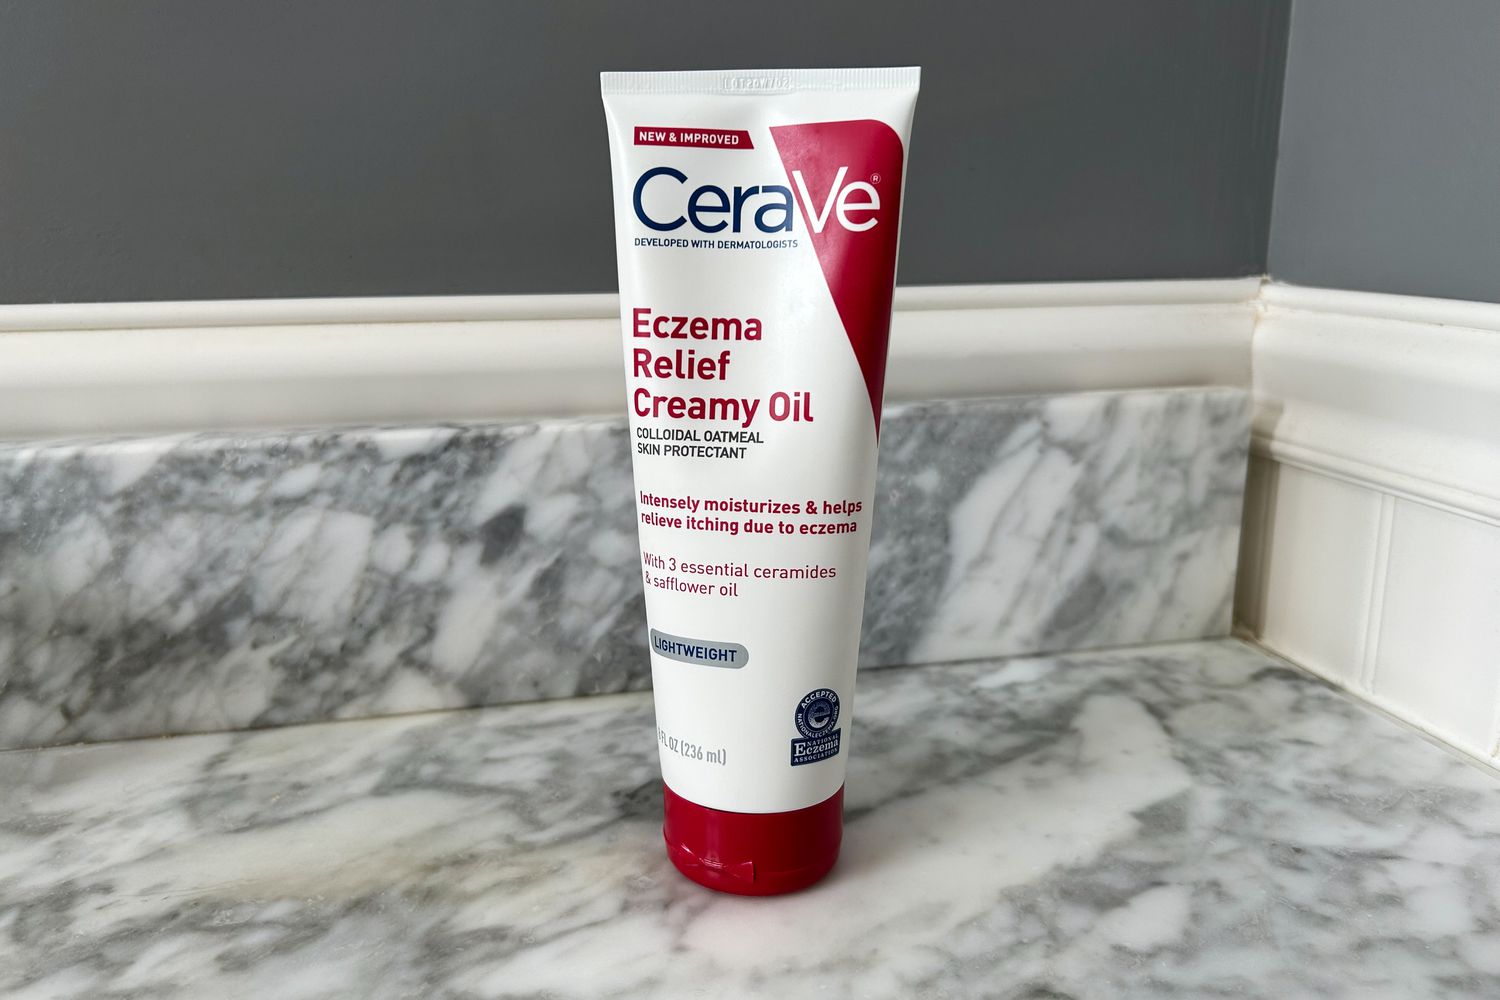 CeraVe Eczema Relief Creamy Oil displayed on a marble bathroom counter